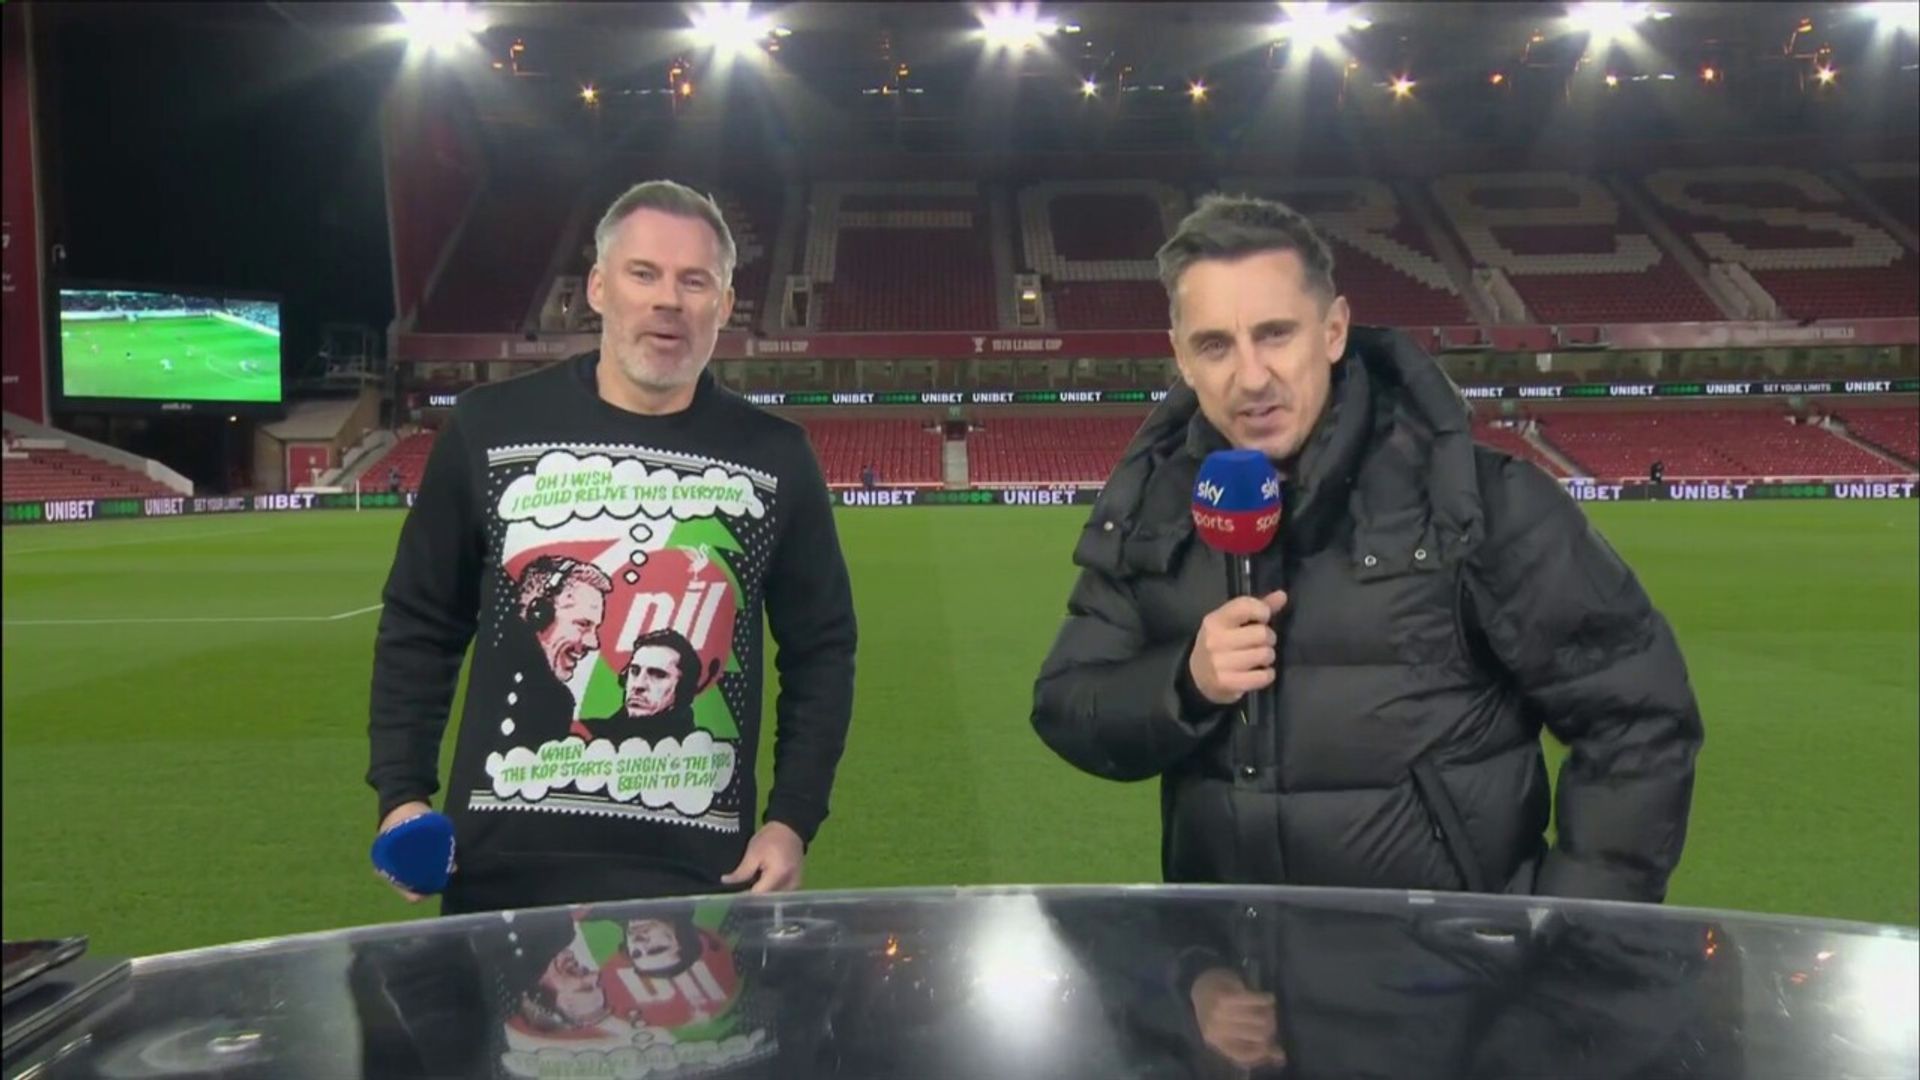 'Look at this man's arrogance' | Carra shows off 7-0 Christmas jumper